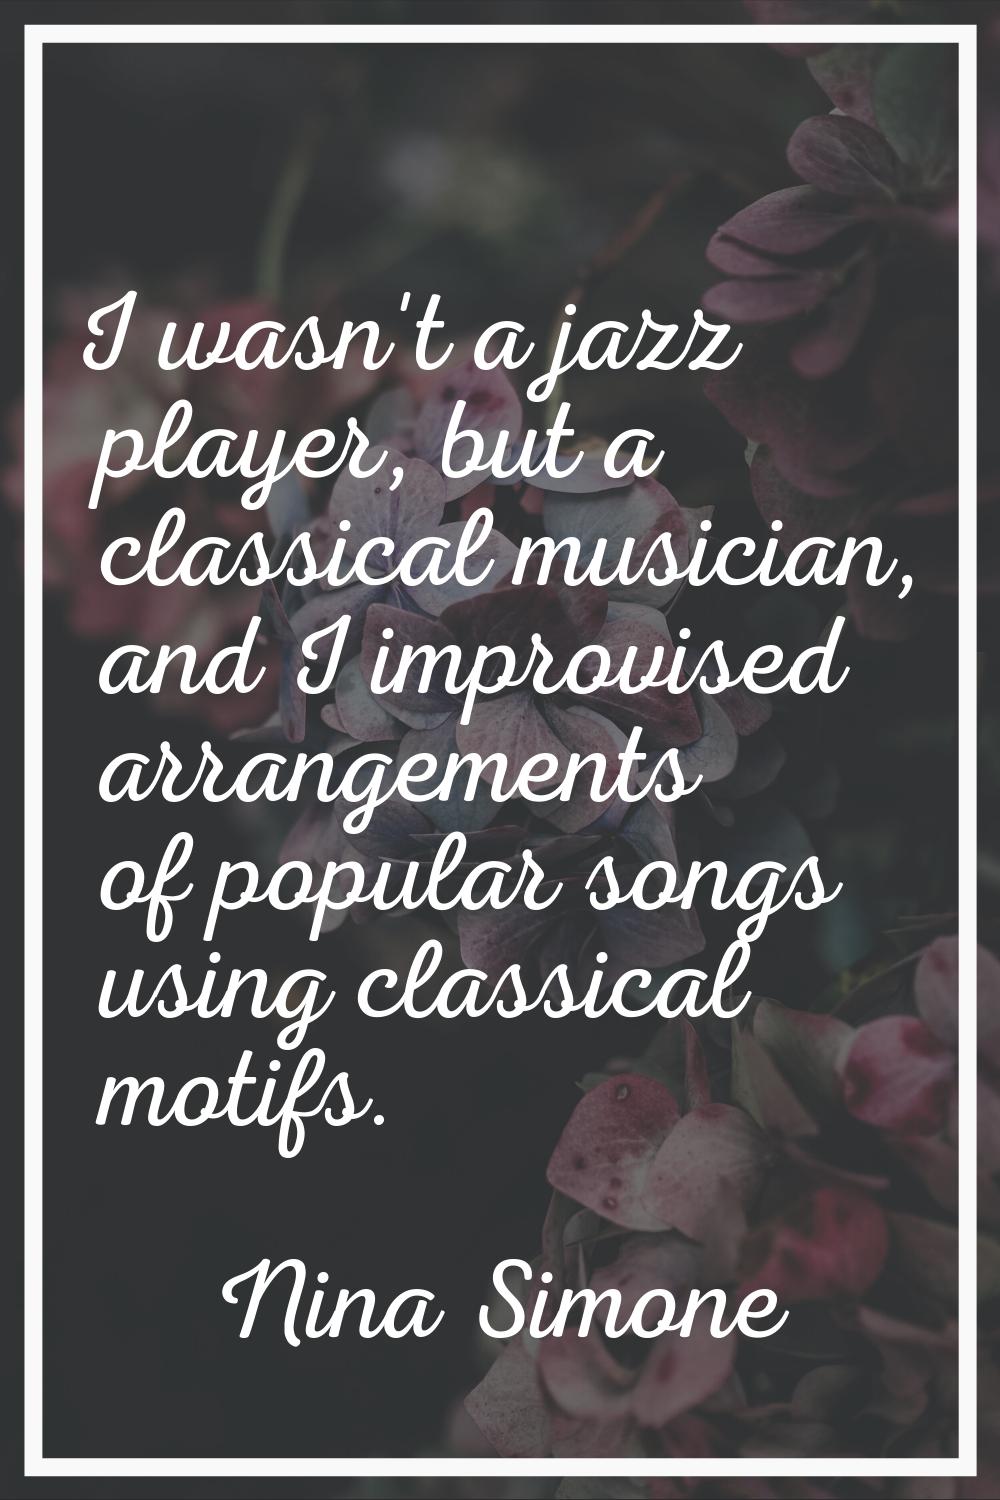 I wasn't a jazz player, but a classical musician, and I improvised arrangements of popular songs us